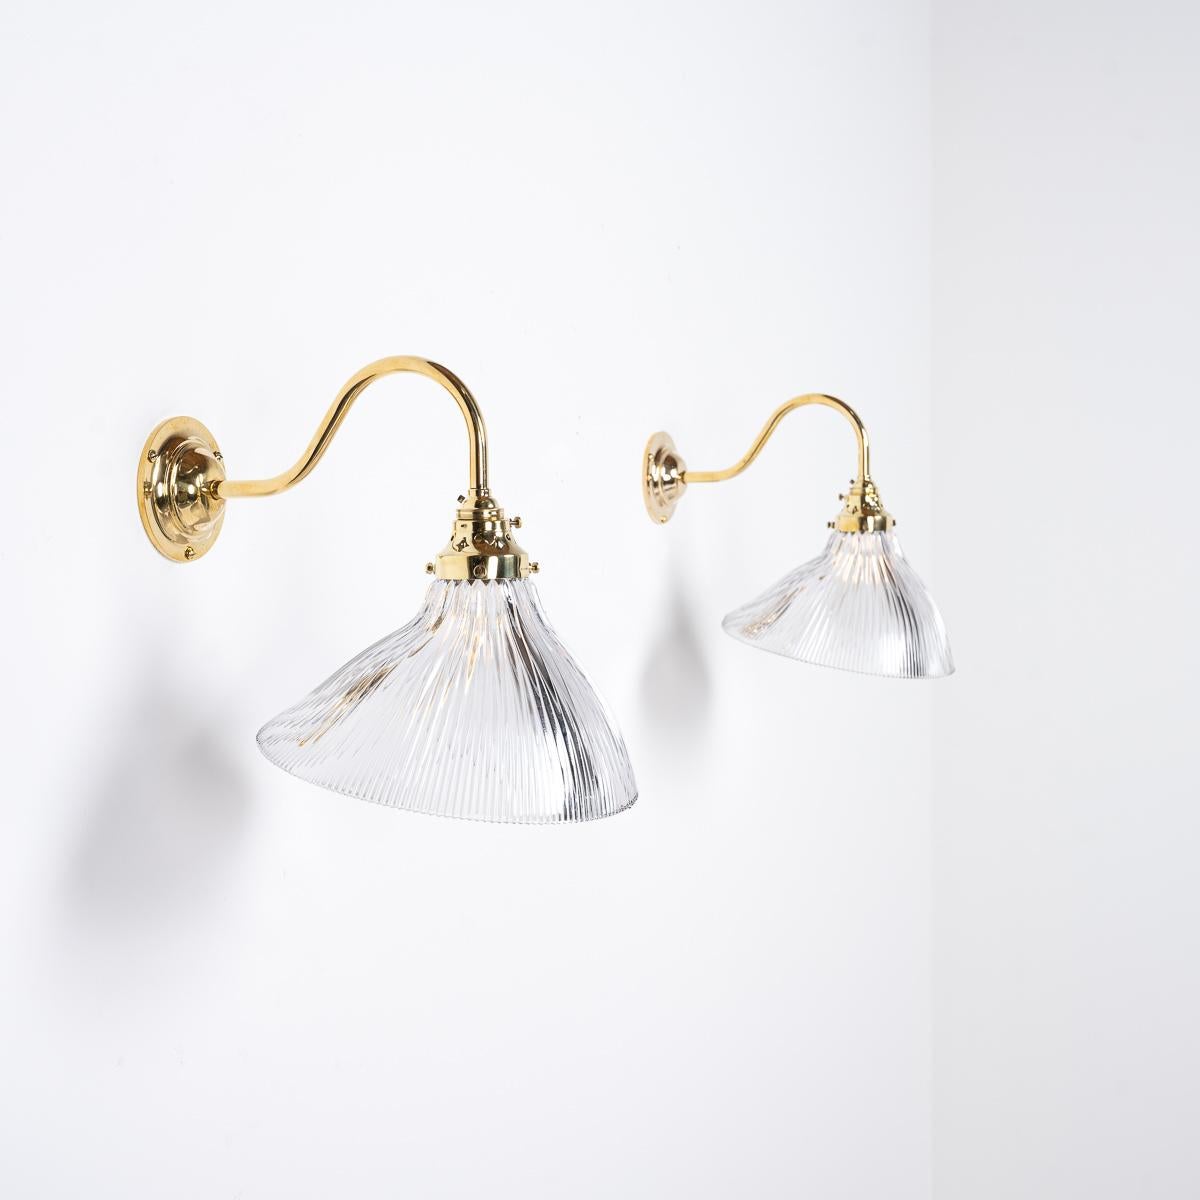 Mid-20th Century Antique Holophane Angled Prismatic Glass Wall Lights on Polished Brass Brackets For Sale